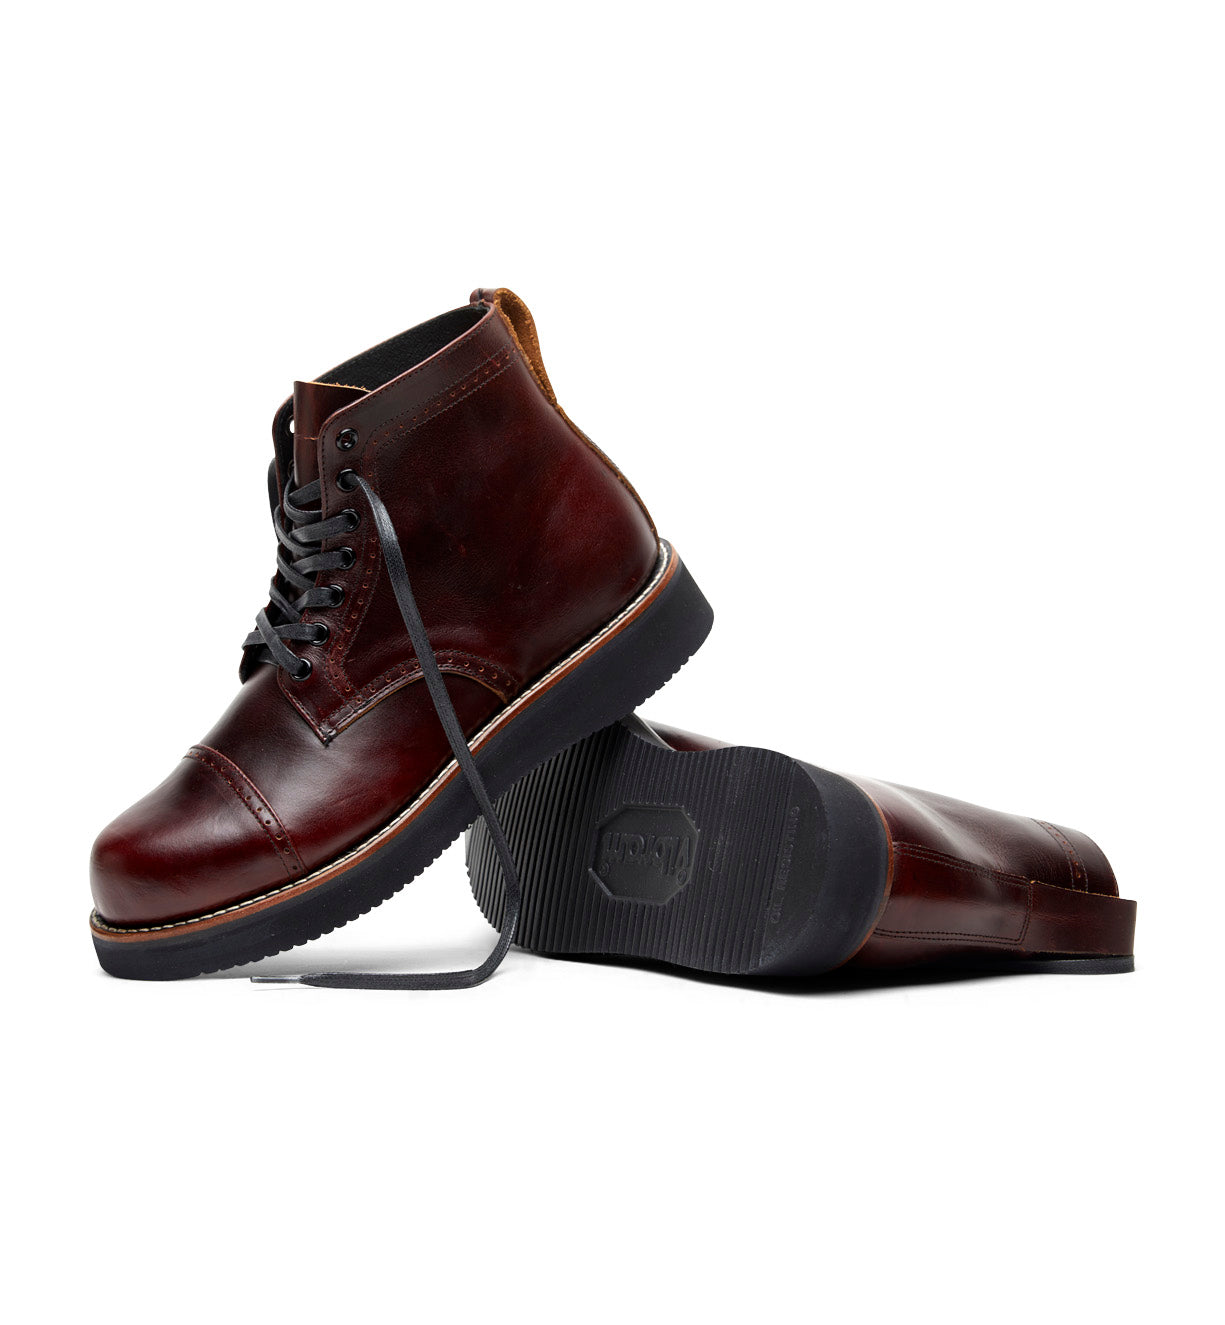 The Broken Homme Aaron Boot, a classic cap toe silhouette, in burgundy leather.